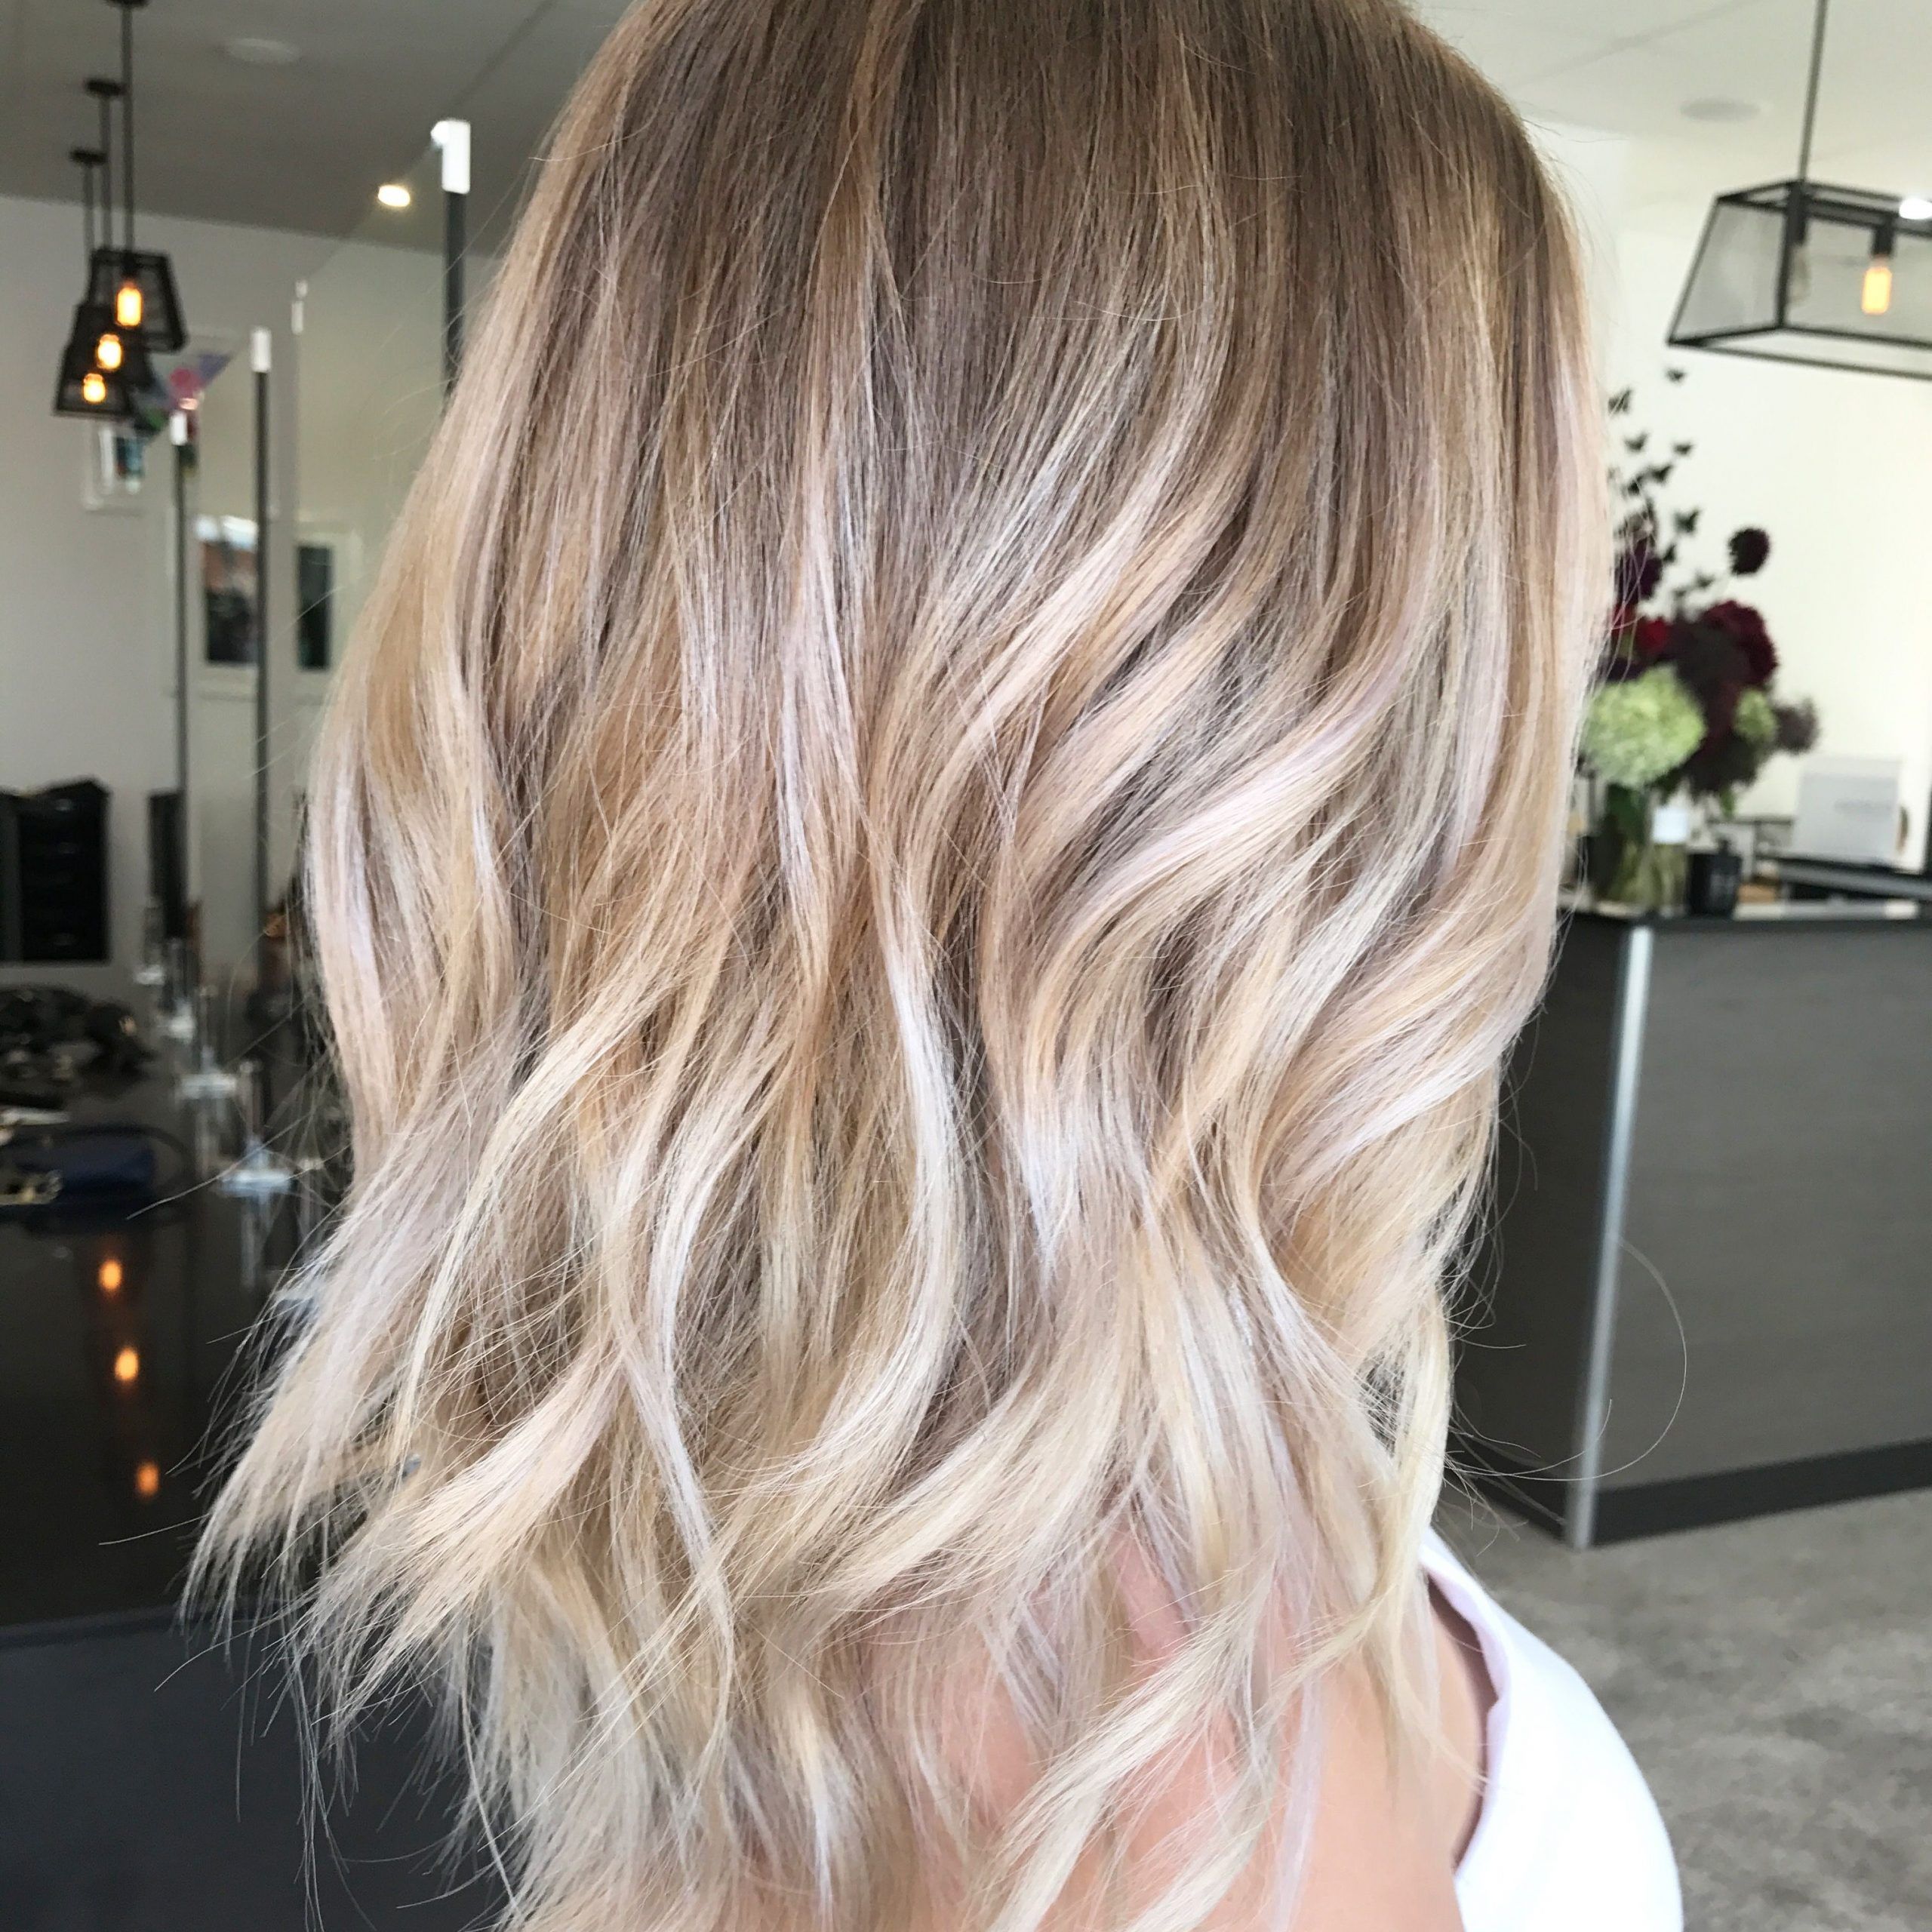 Beautiful Hairstyle Ideas | Blond Hårfärg, Ombre Hårfärg Intended For Long Pixie Hairstyles With Dramatic Blonde Balayage (View 2 of 20)